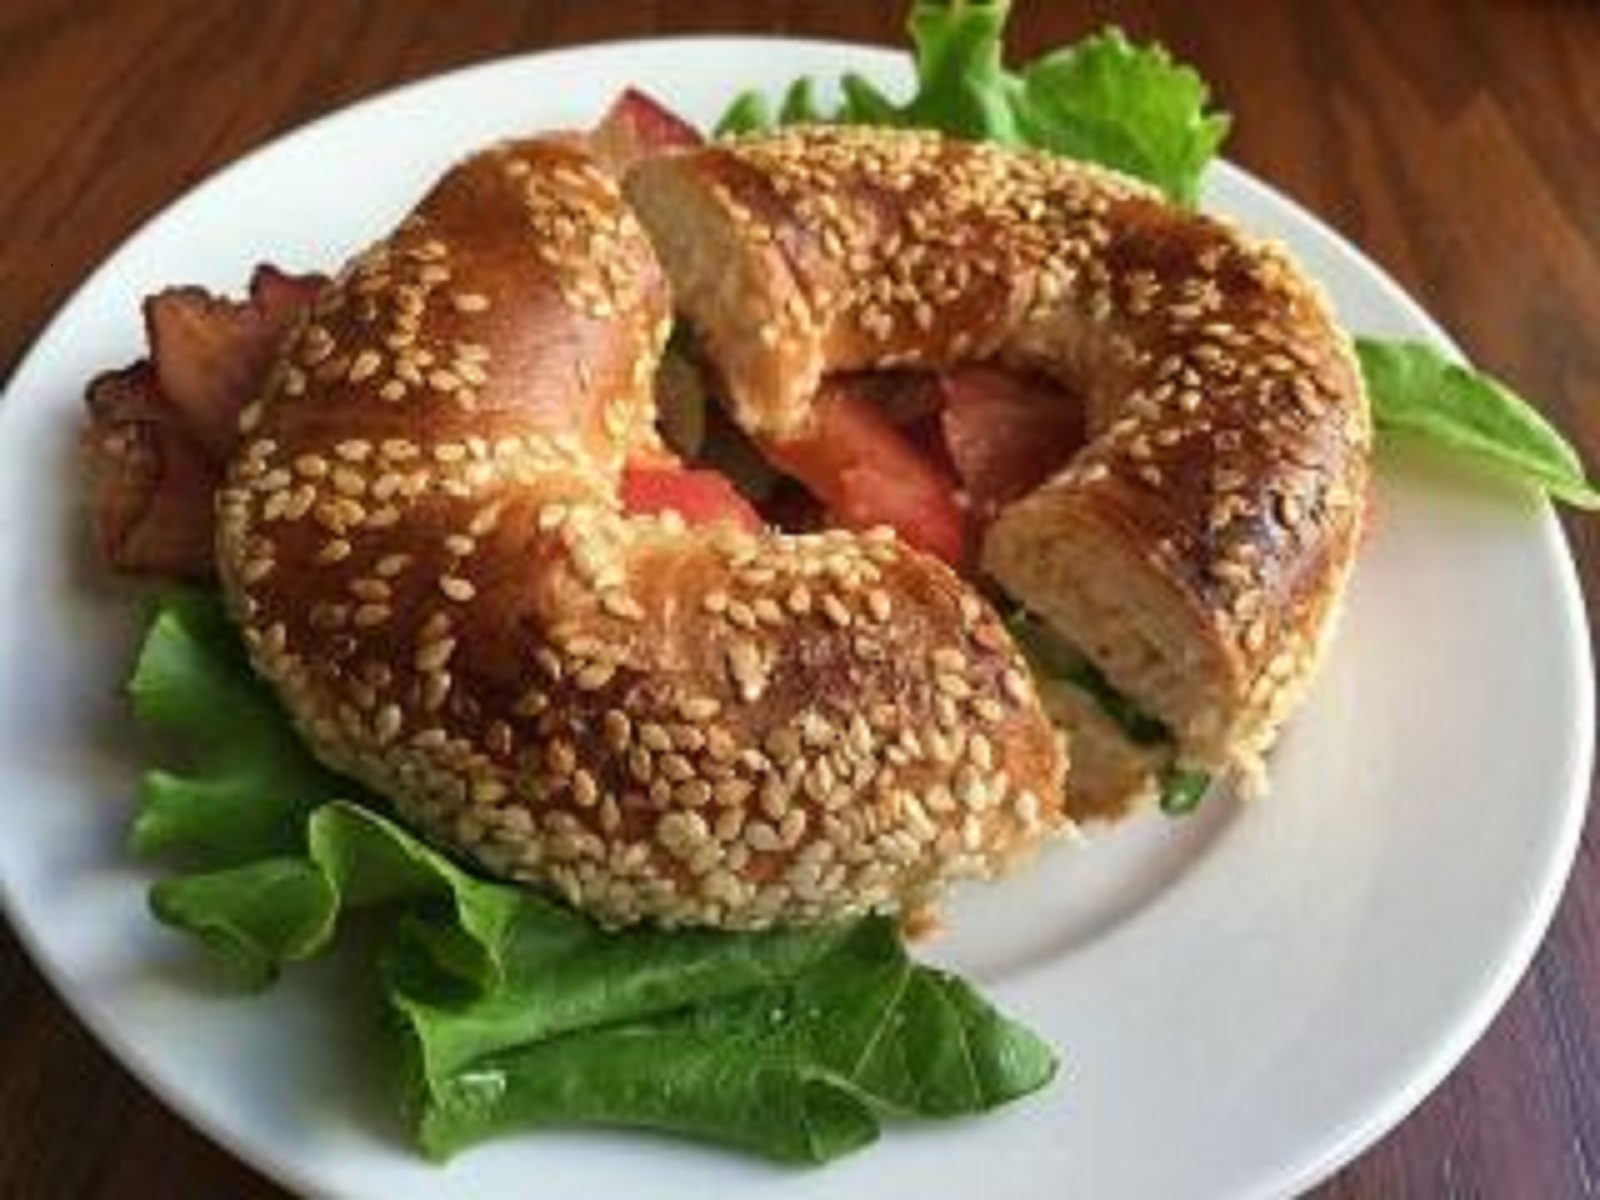 Bagel and Deli